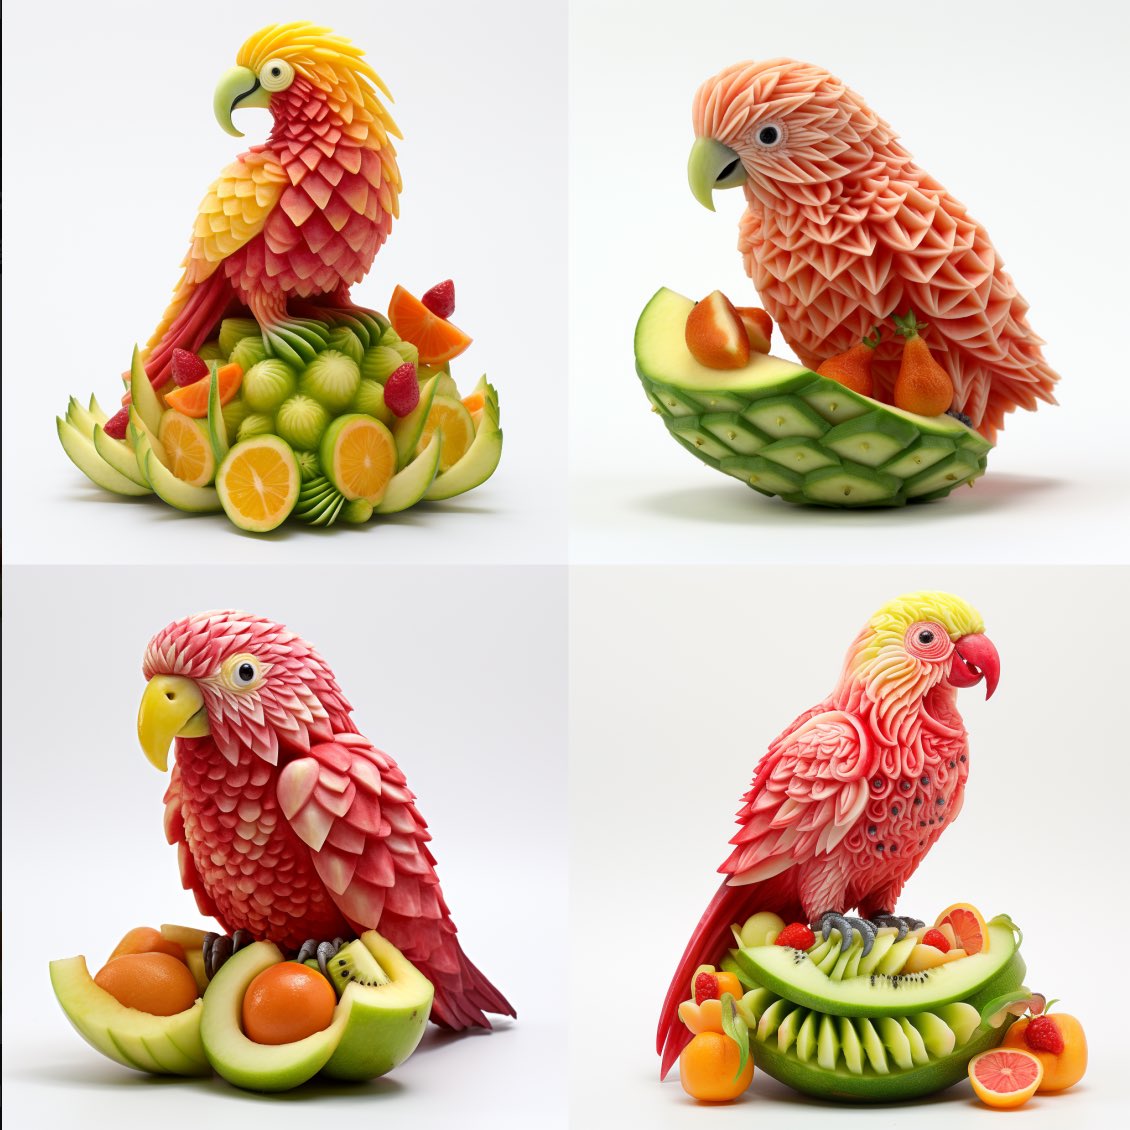 photography, fruit carving, Parrot made out of strawberries apples cantaloupes, white background